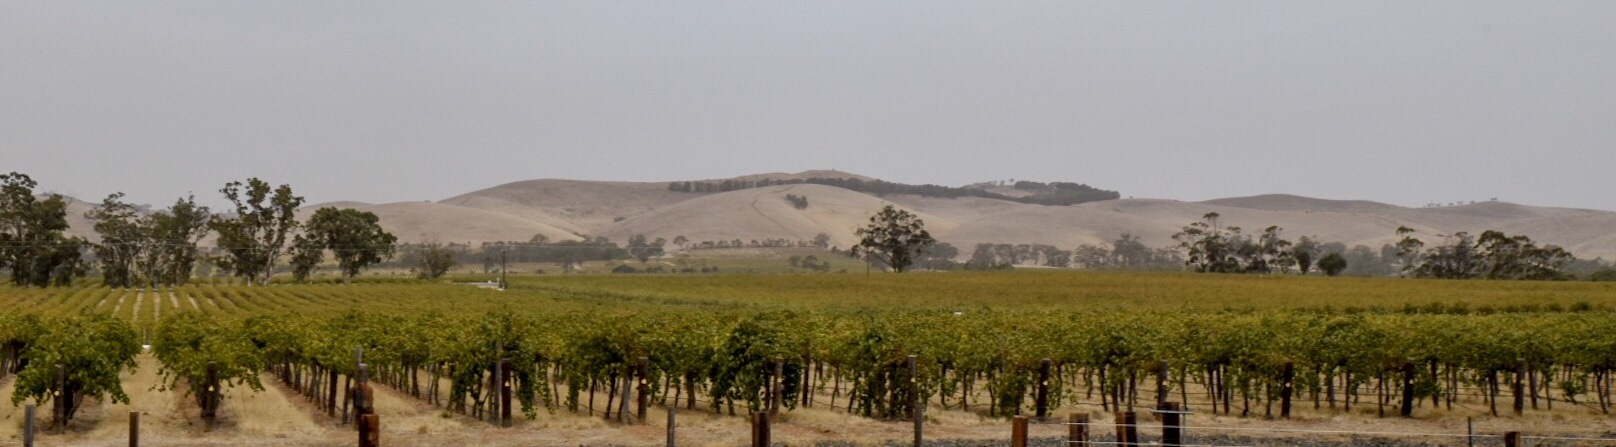 One of the beautiful wineries in the Barossa